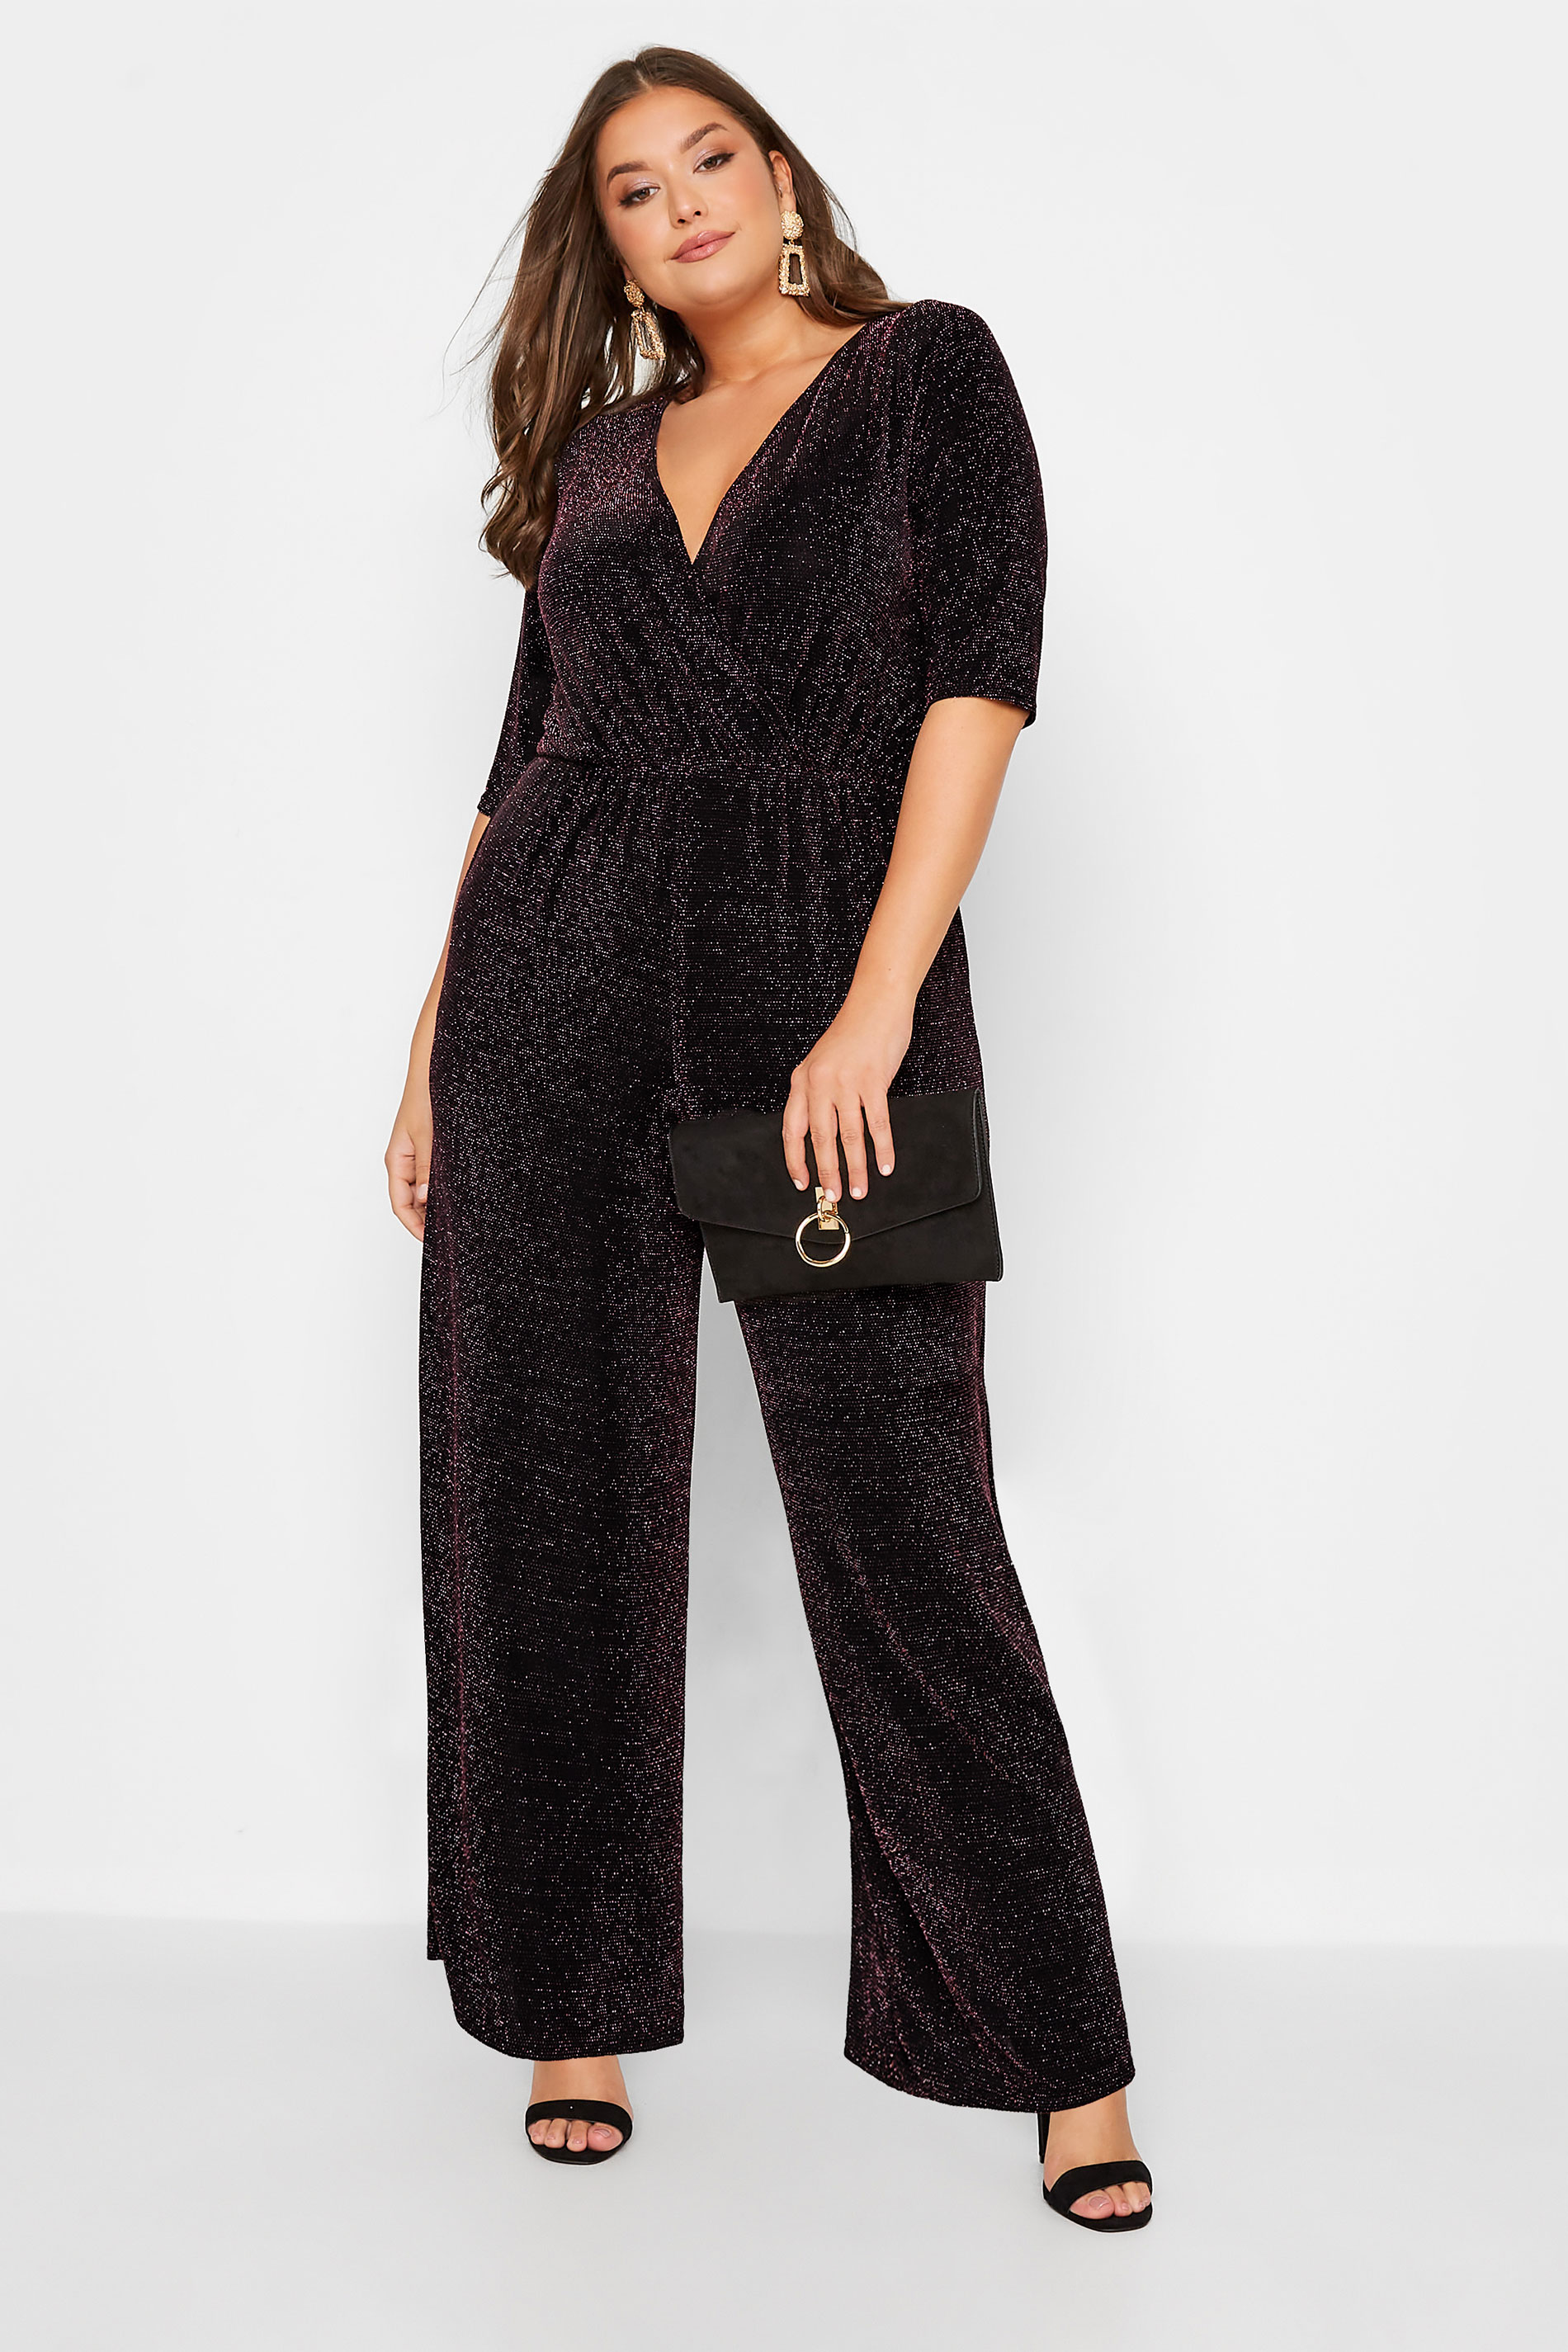 LIMITED COLLECTION Plus Size Black & Pink Glitter Stretch Wrap Jumpsuit | Yours Clothing 2